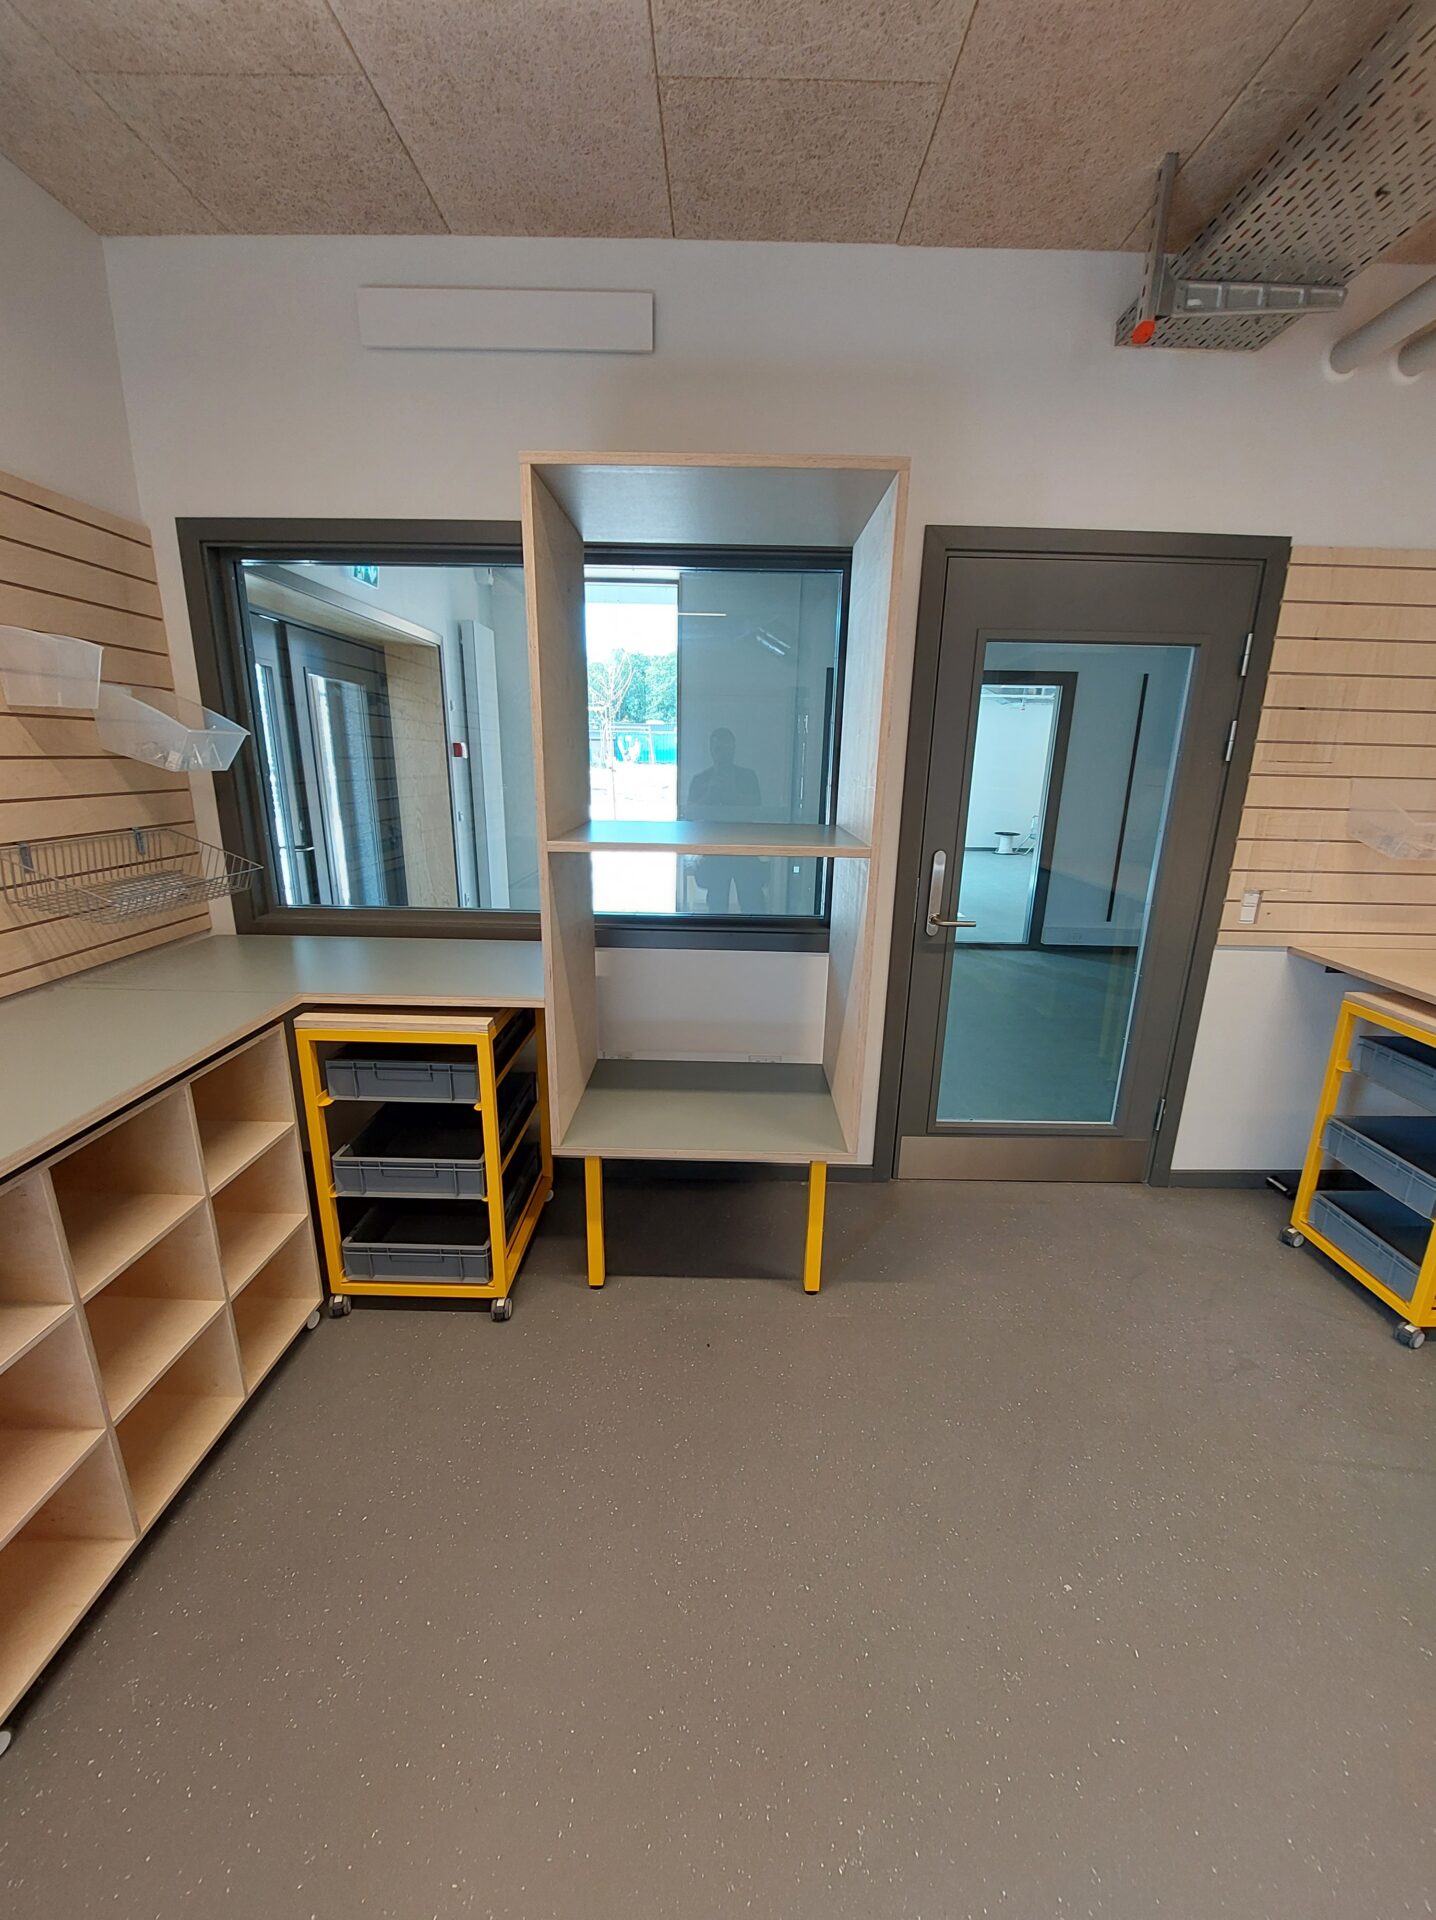 Makerspace - Osted Skole 2